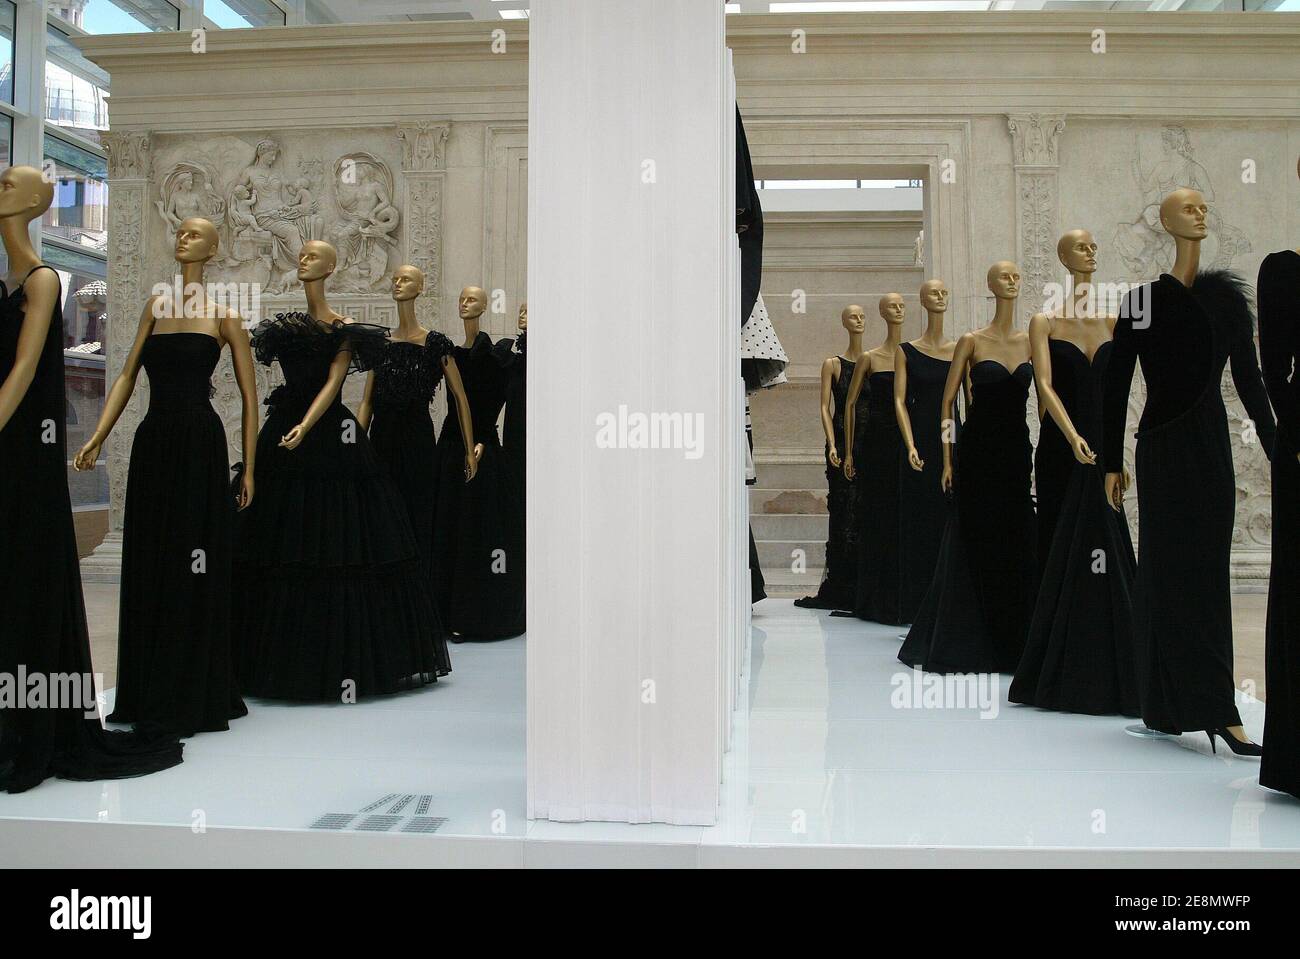 Valentino creations are displayed at the Valentino's 45 Years of Fashion  exhibition celebrating the 45th Anniversary of the Valentino fashion house,  at the Ara Pacis Museum in Rome, Italy on July 6,